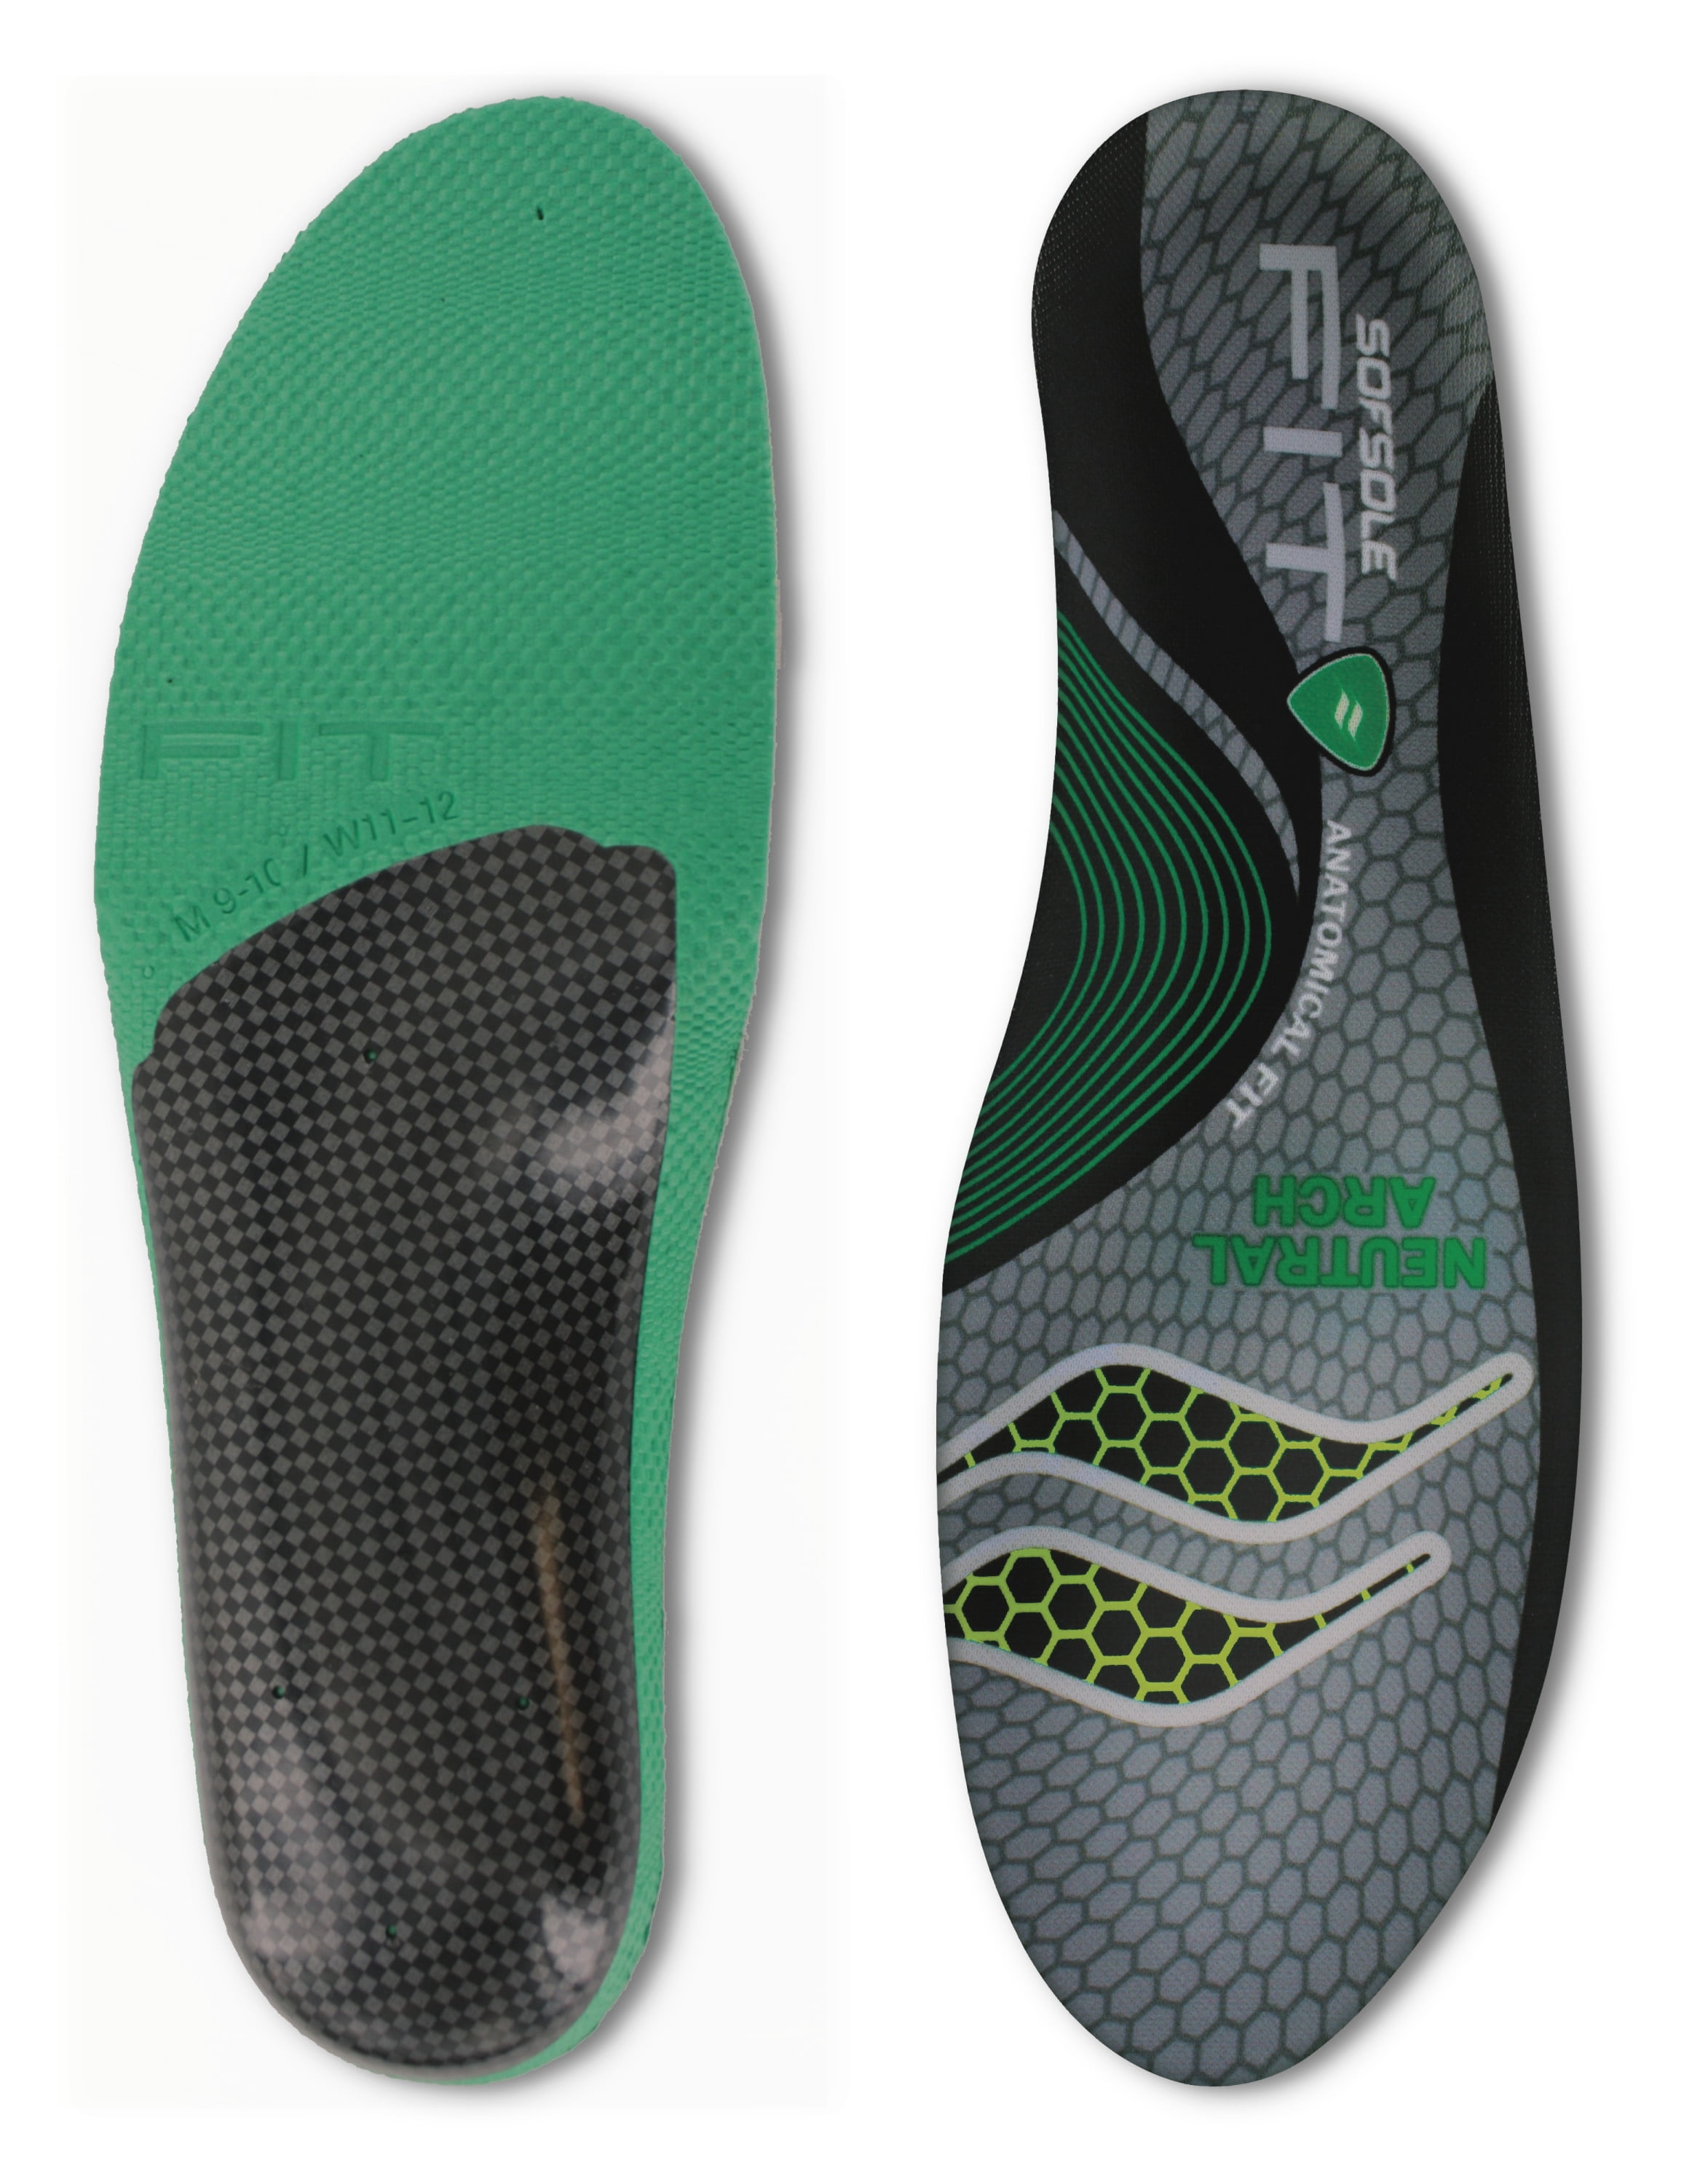 Sof Sole  Insoles  Unisex FIT Support Full Length Foam Shoe  